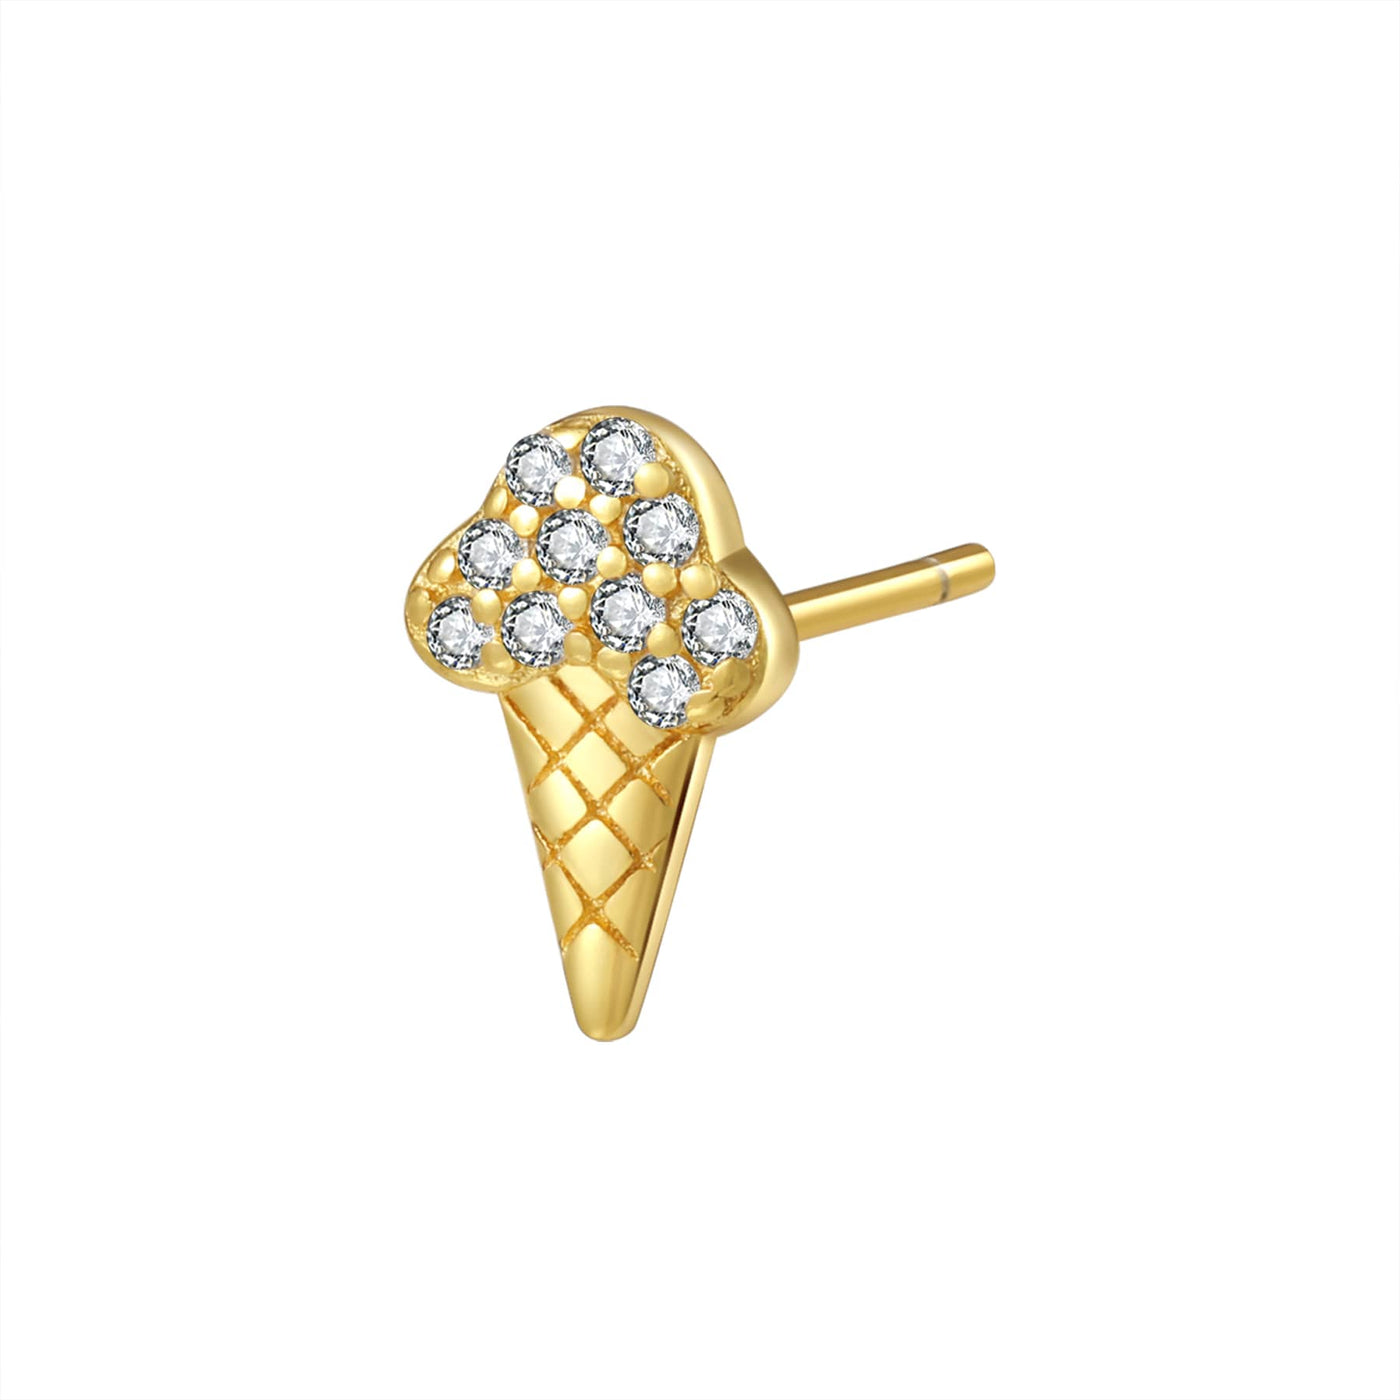 Ice Cream Cone Stud Earring Sterling Silver